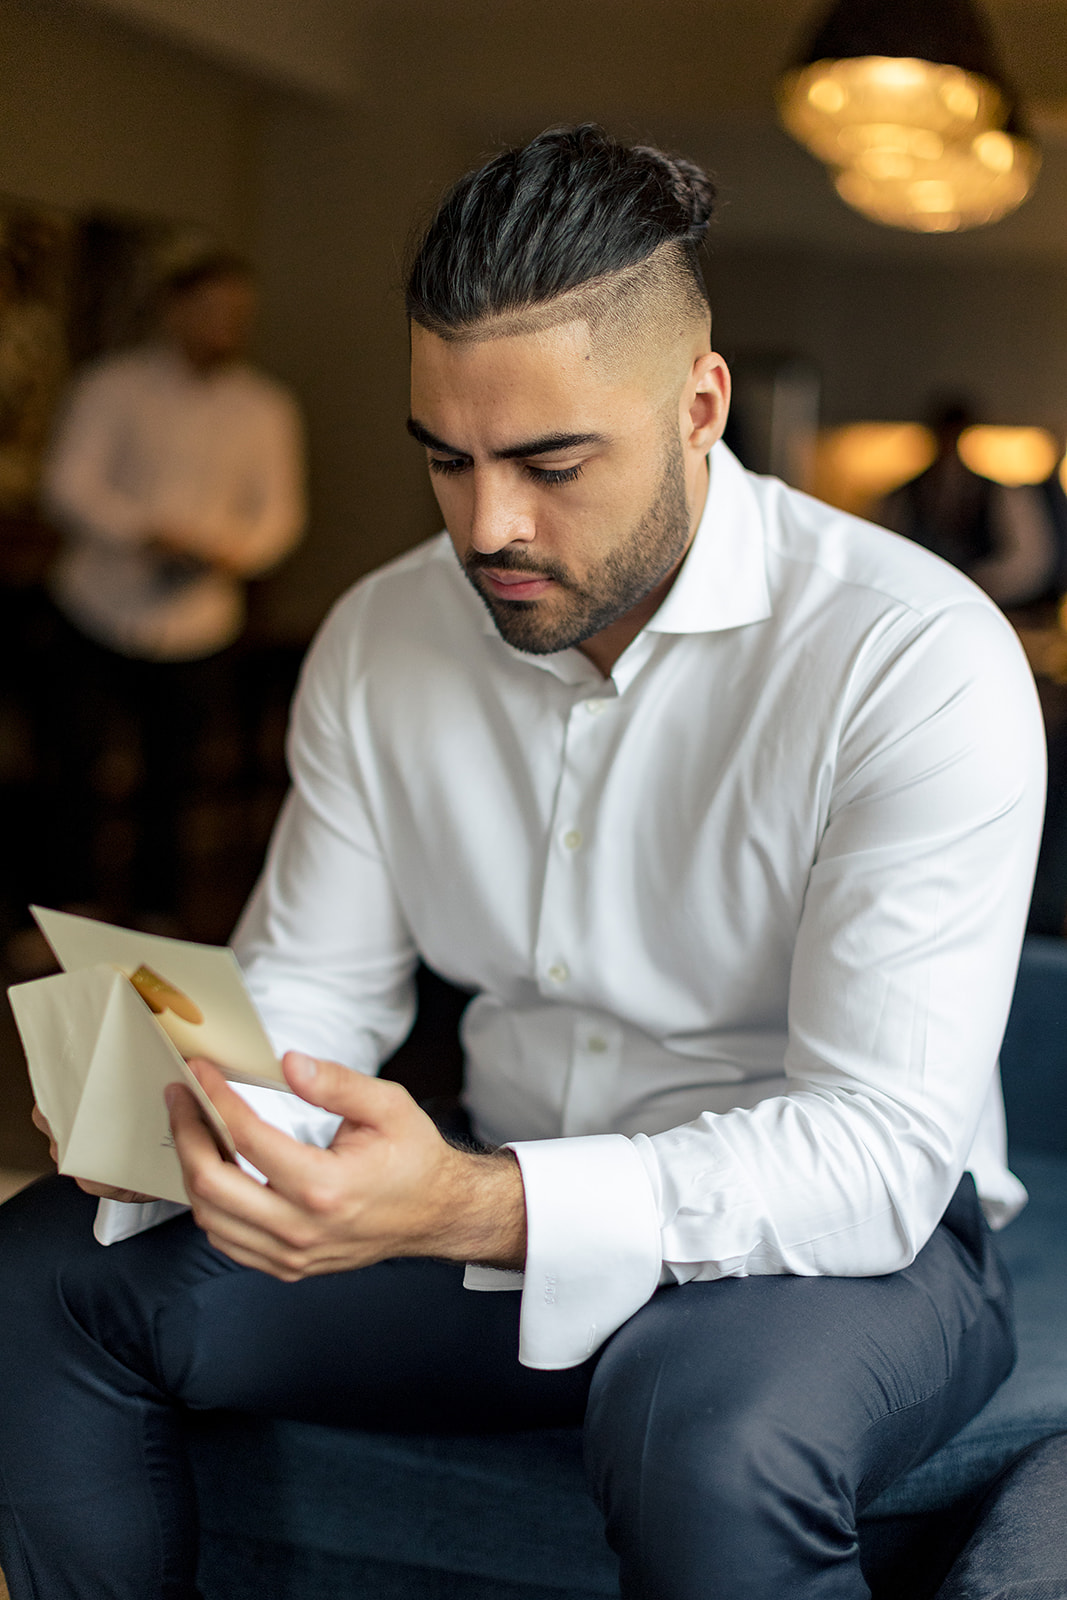 groom reading his card on his wedding day.